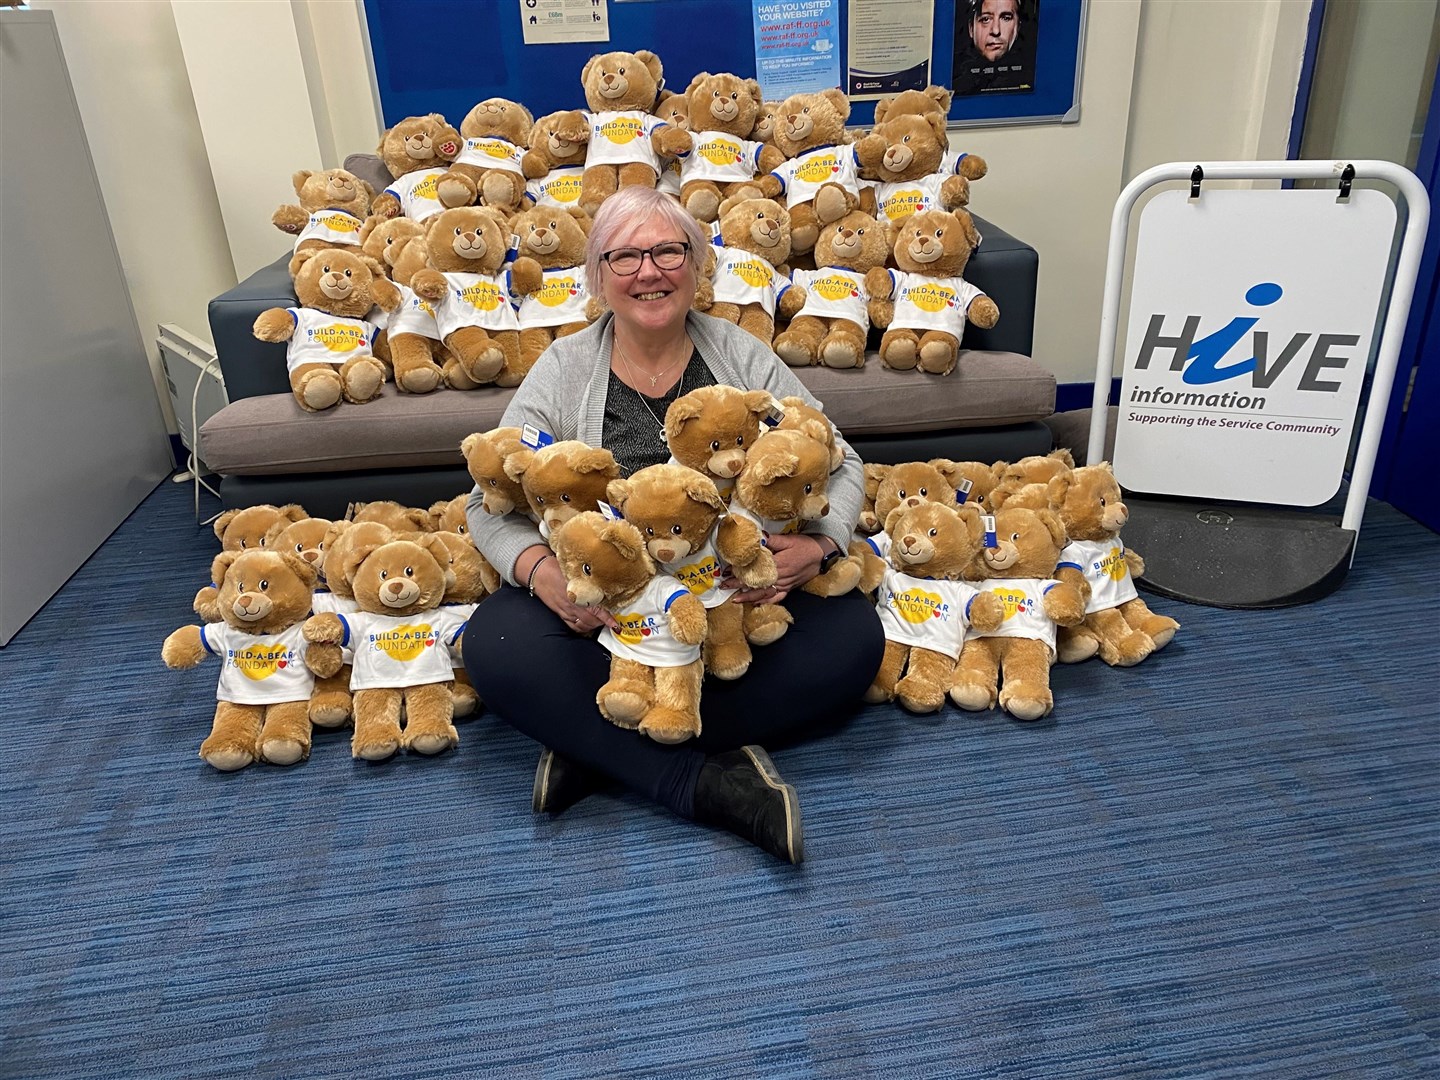 Debbie Tulip, HIVE Information Officer at RAF Lossiemouth, with the teddy bears.